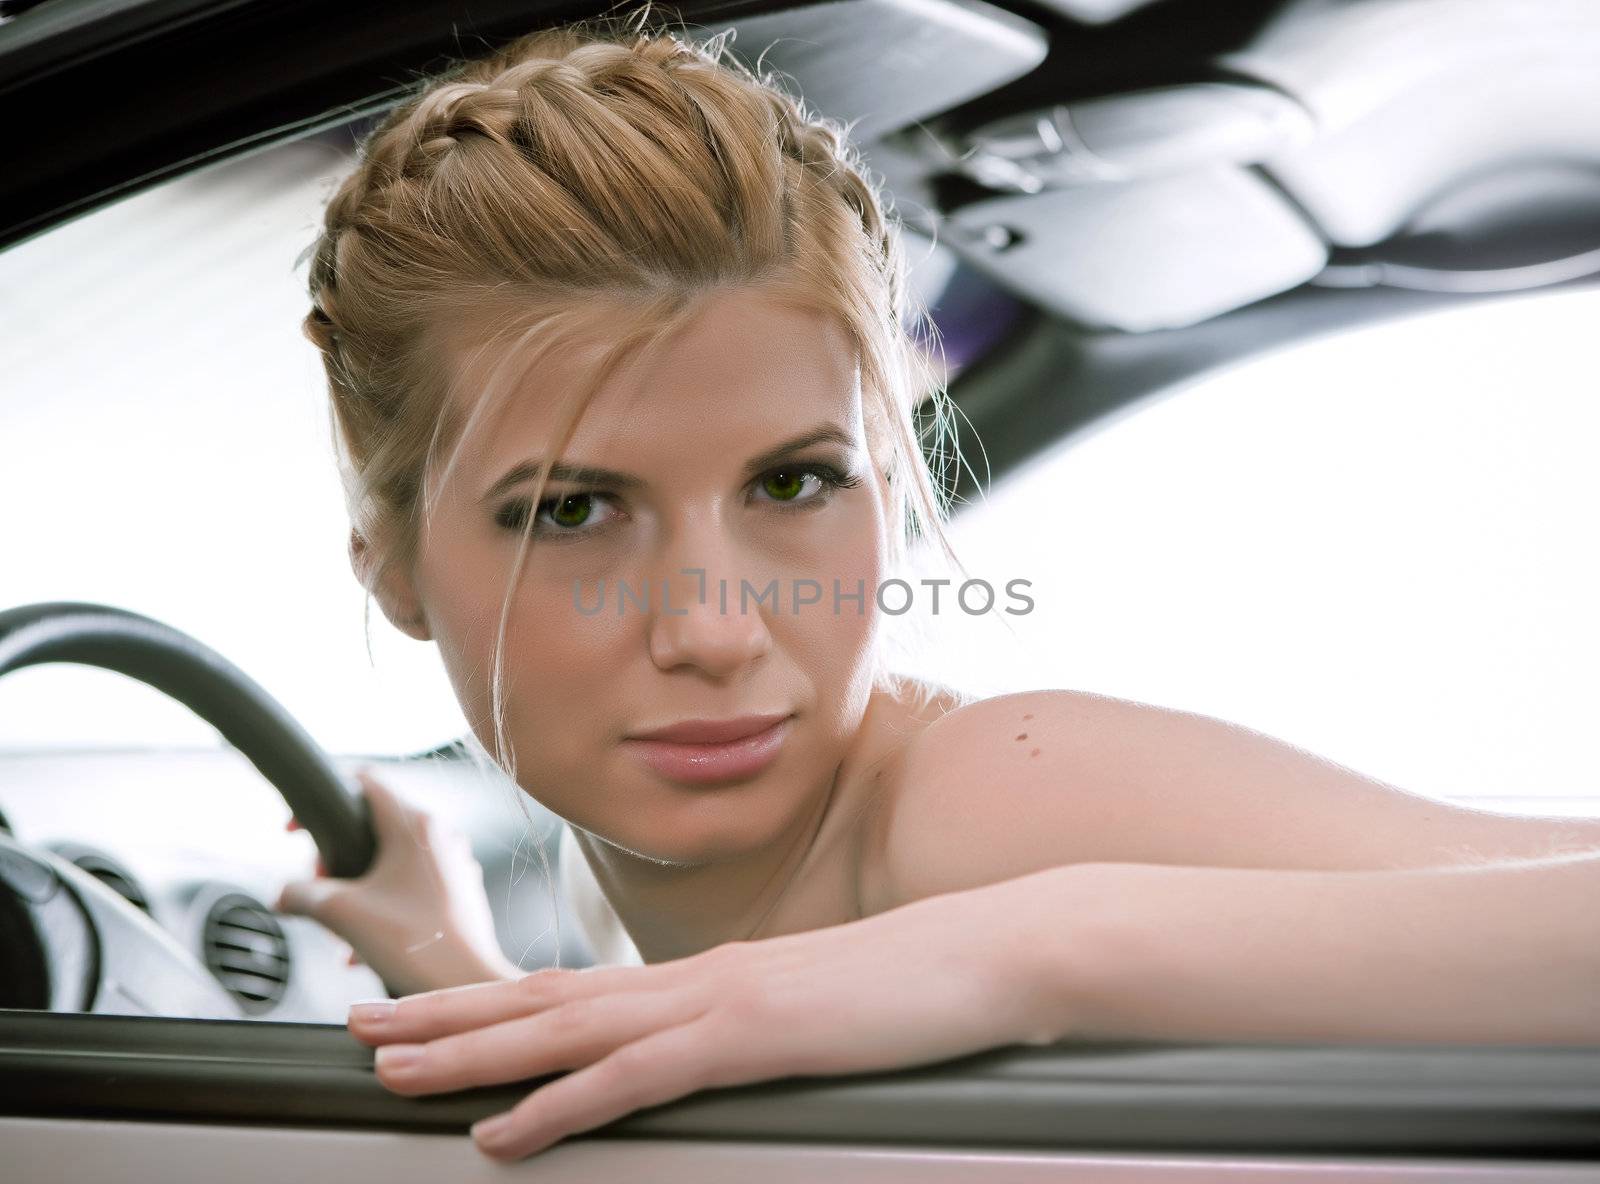  Young woman in the car. by vladimir_sklyarov